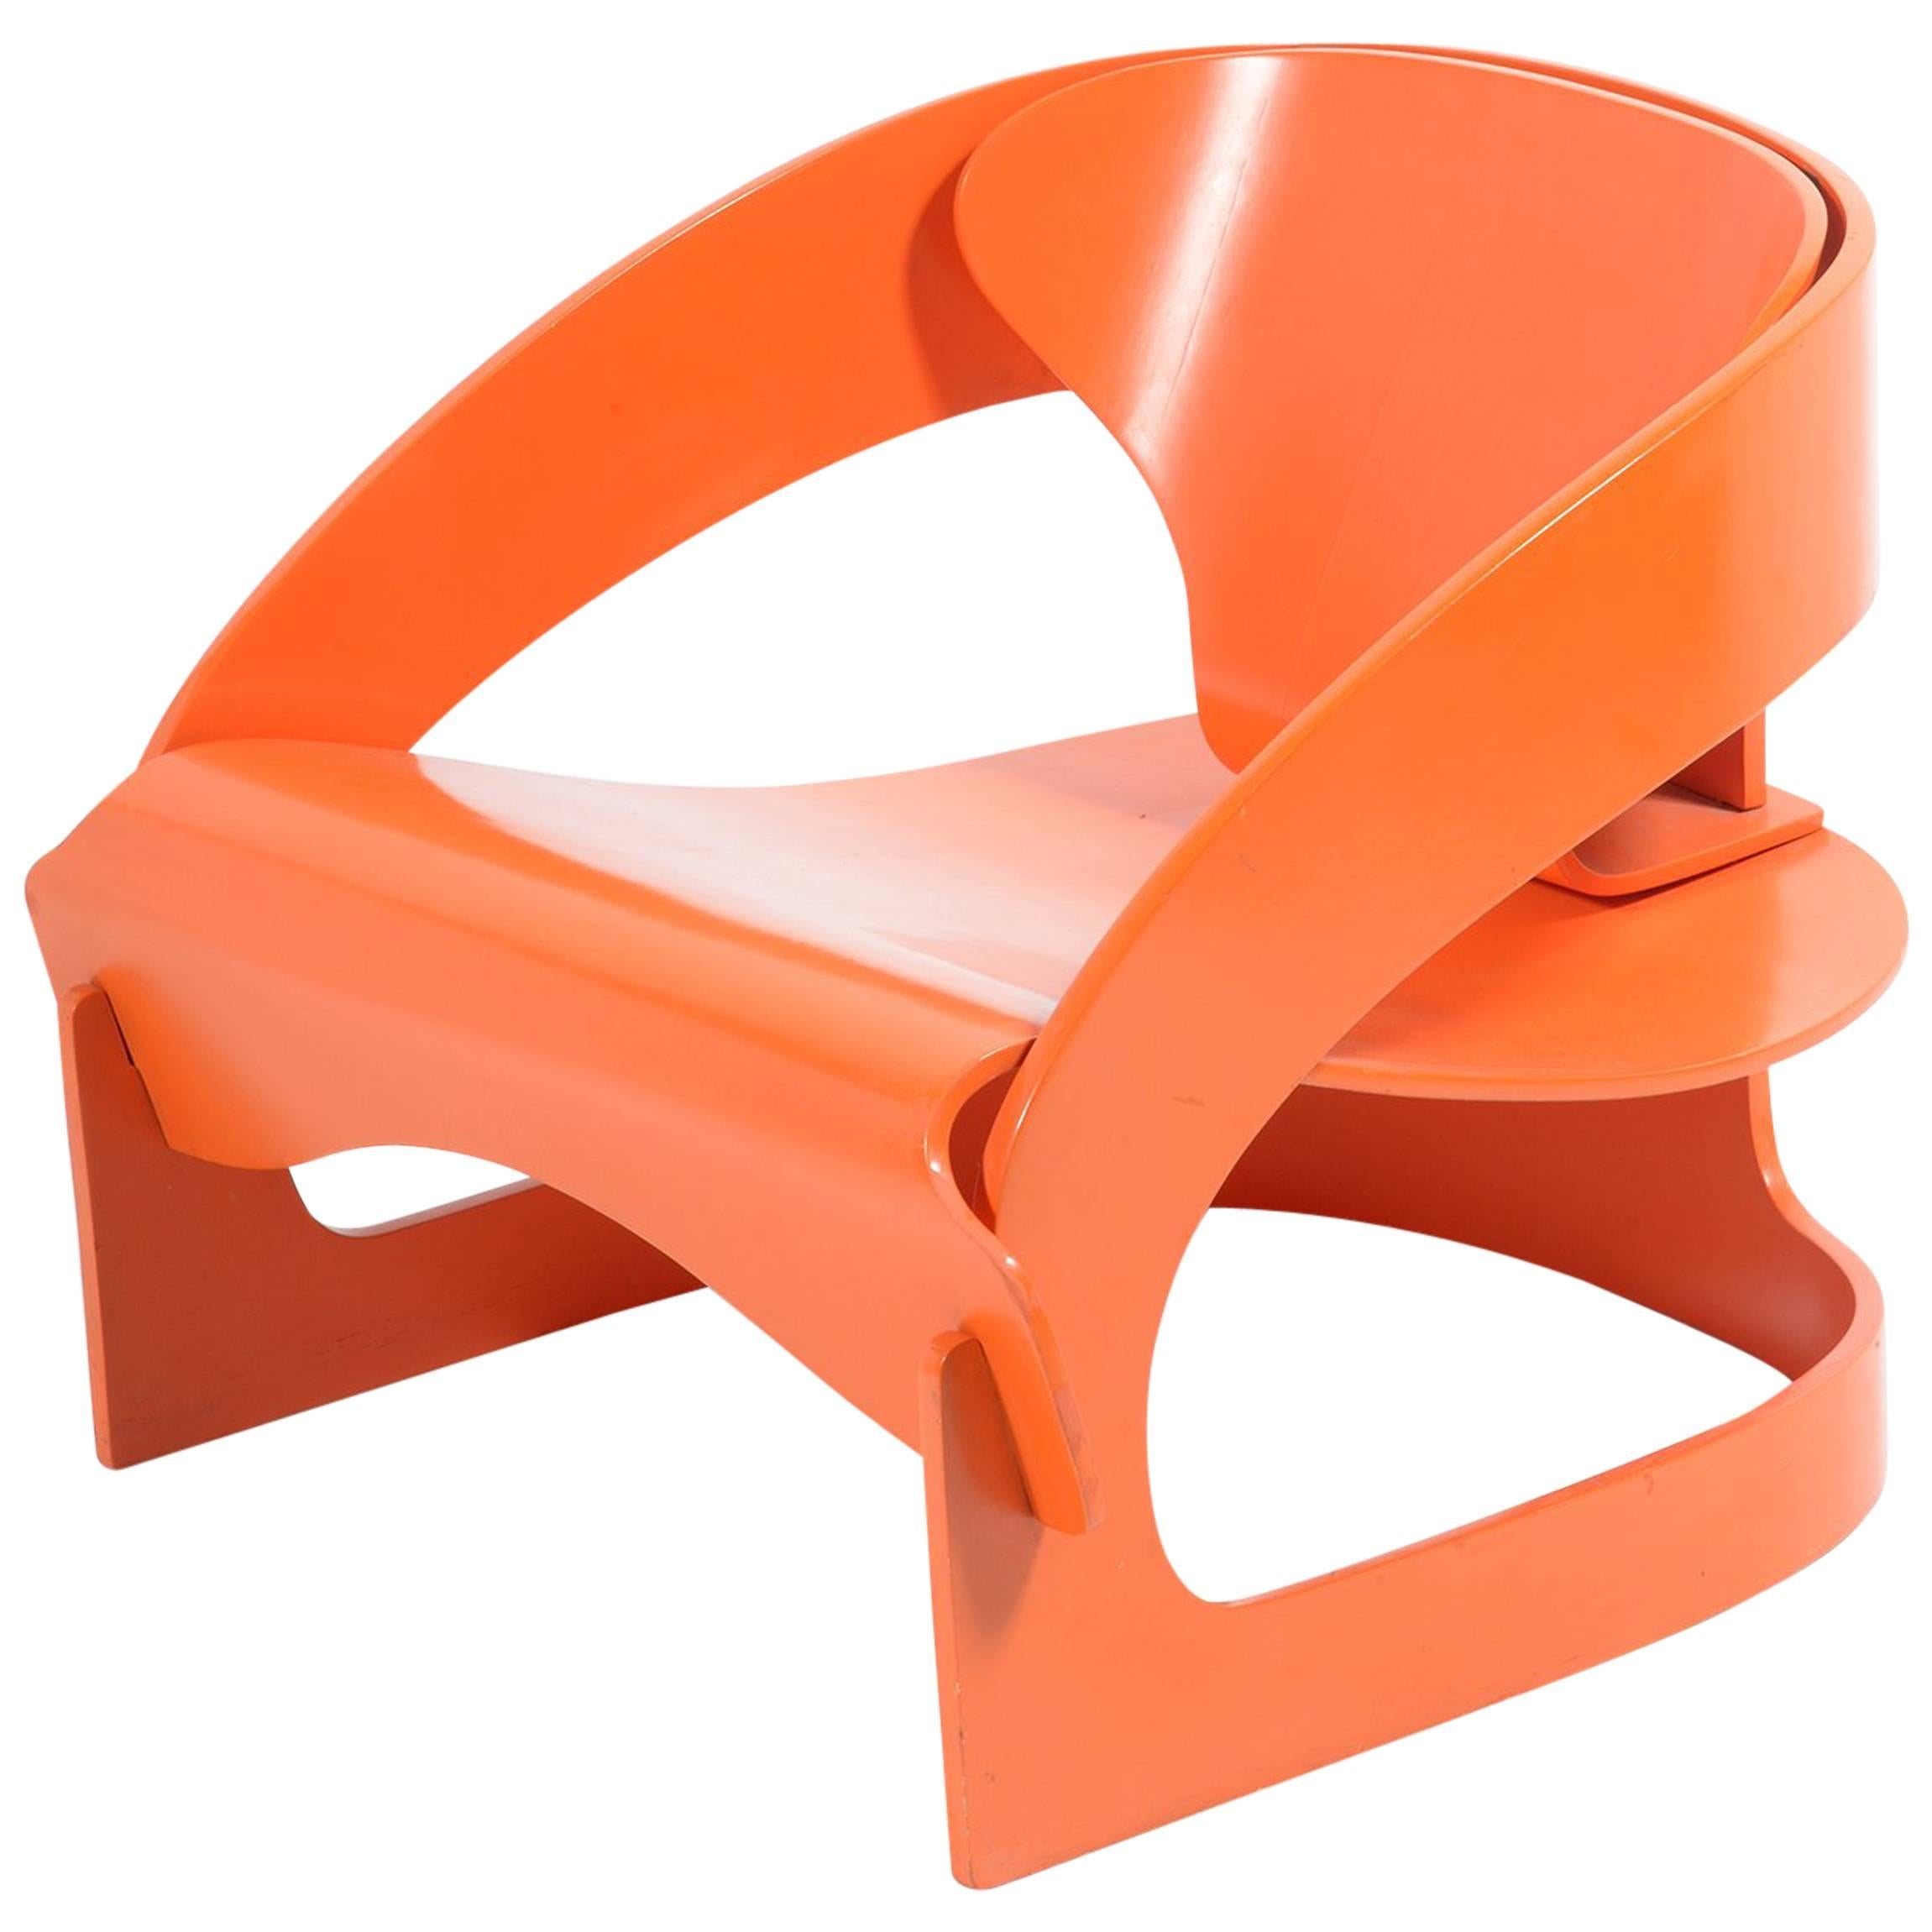 Iconic Mid-Century Orange Armchair by Joe Colombo for Kartell